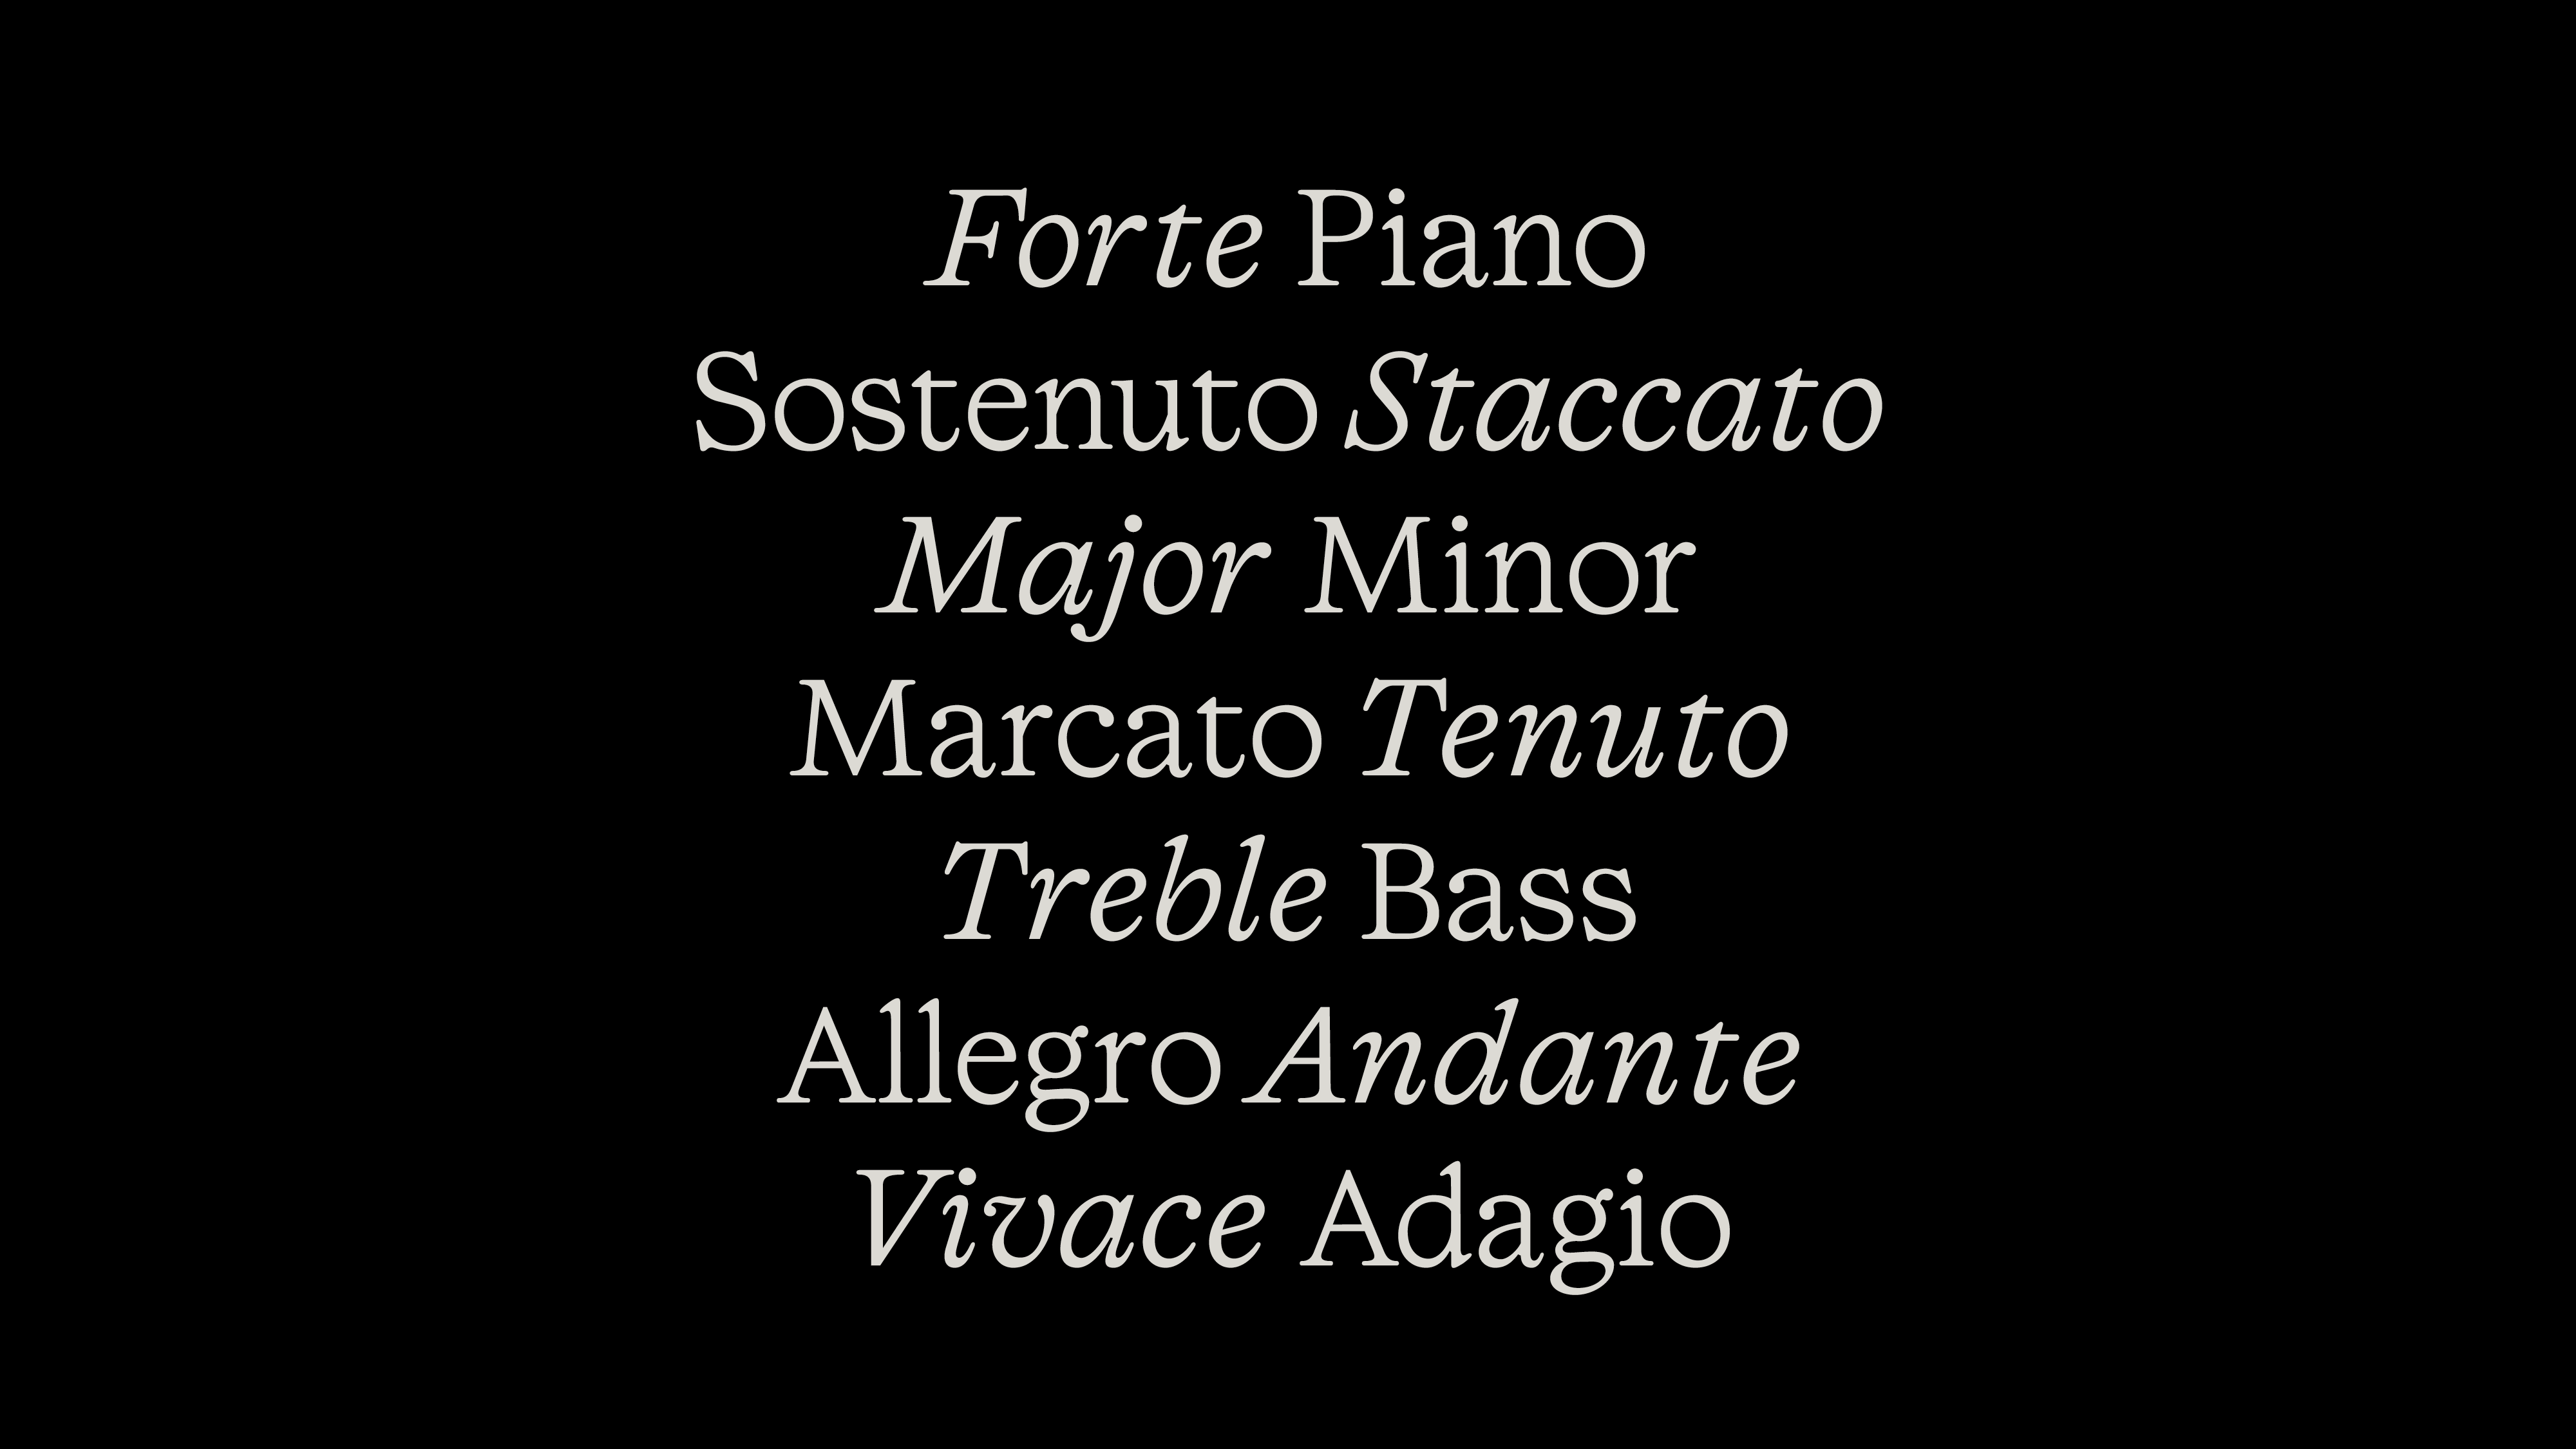 Different musical words set in Score regular and Score italic.